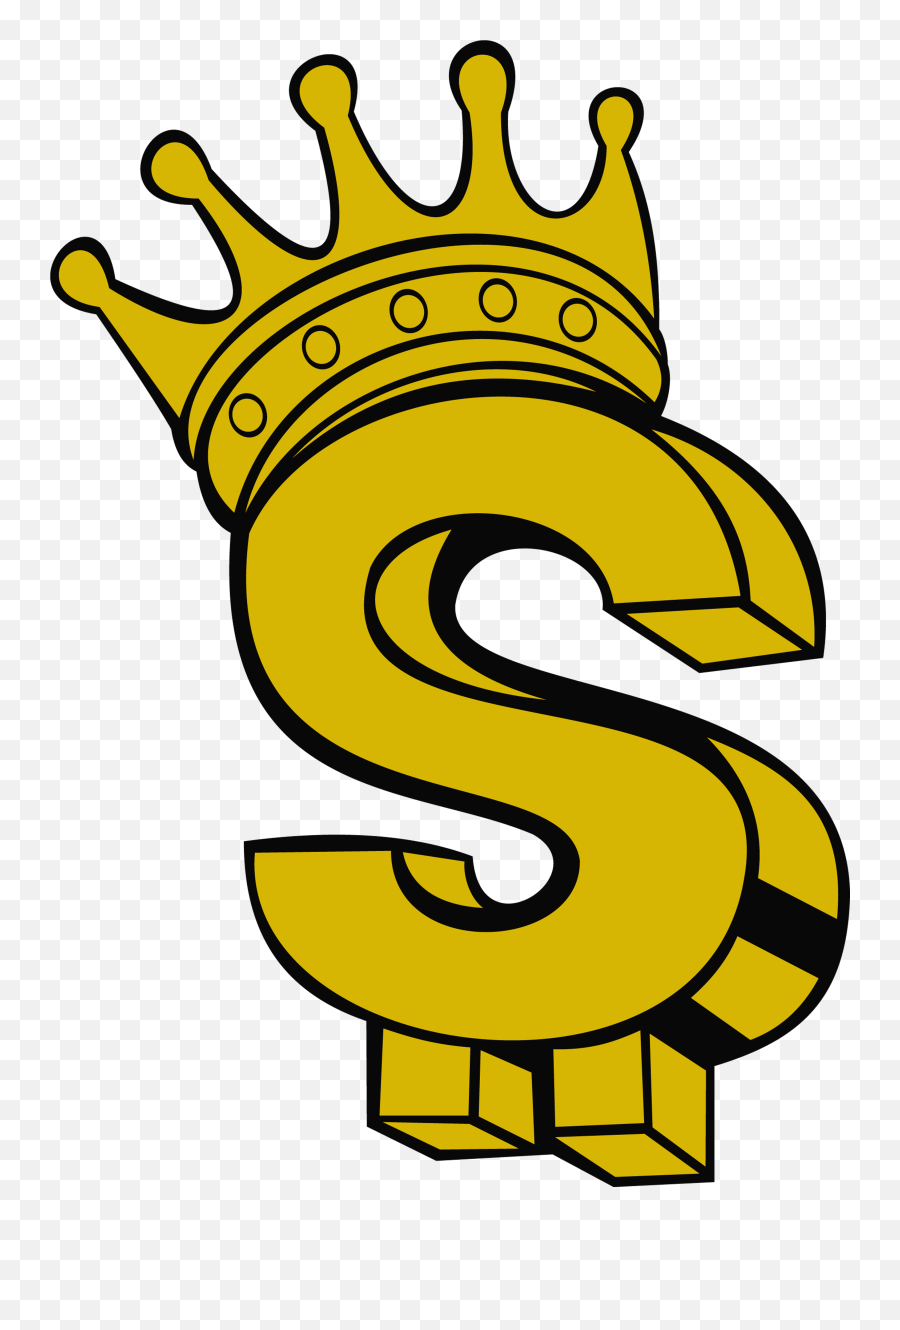 Download Wearing Dollar Crown Royalty - Free Coin With Sign Hq Emoji,Royalty Free D&d Emoticons